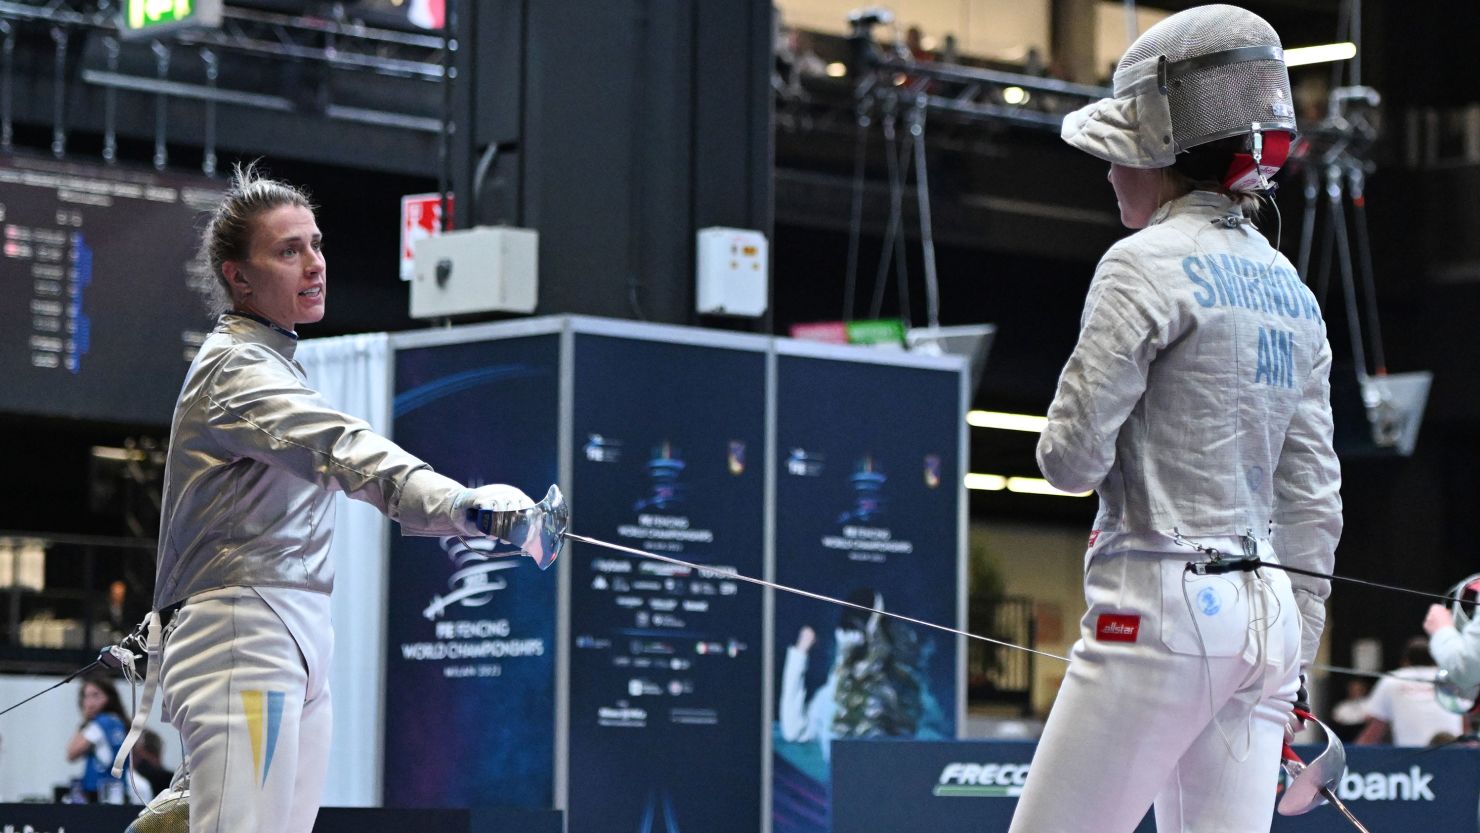 Olga Kharlan of Ukraine refused to shake hands with Anna Smirnova of Russia, presenting a saber to tap instead, at the Fencing World Championship, in Milan on 27 July 2023